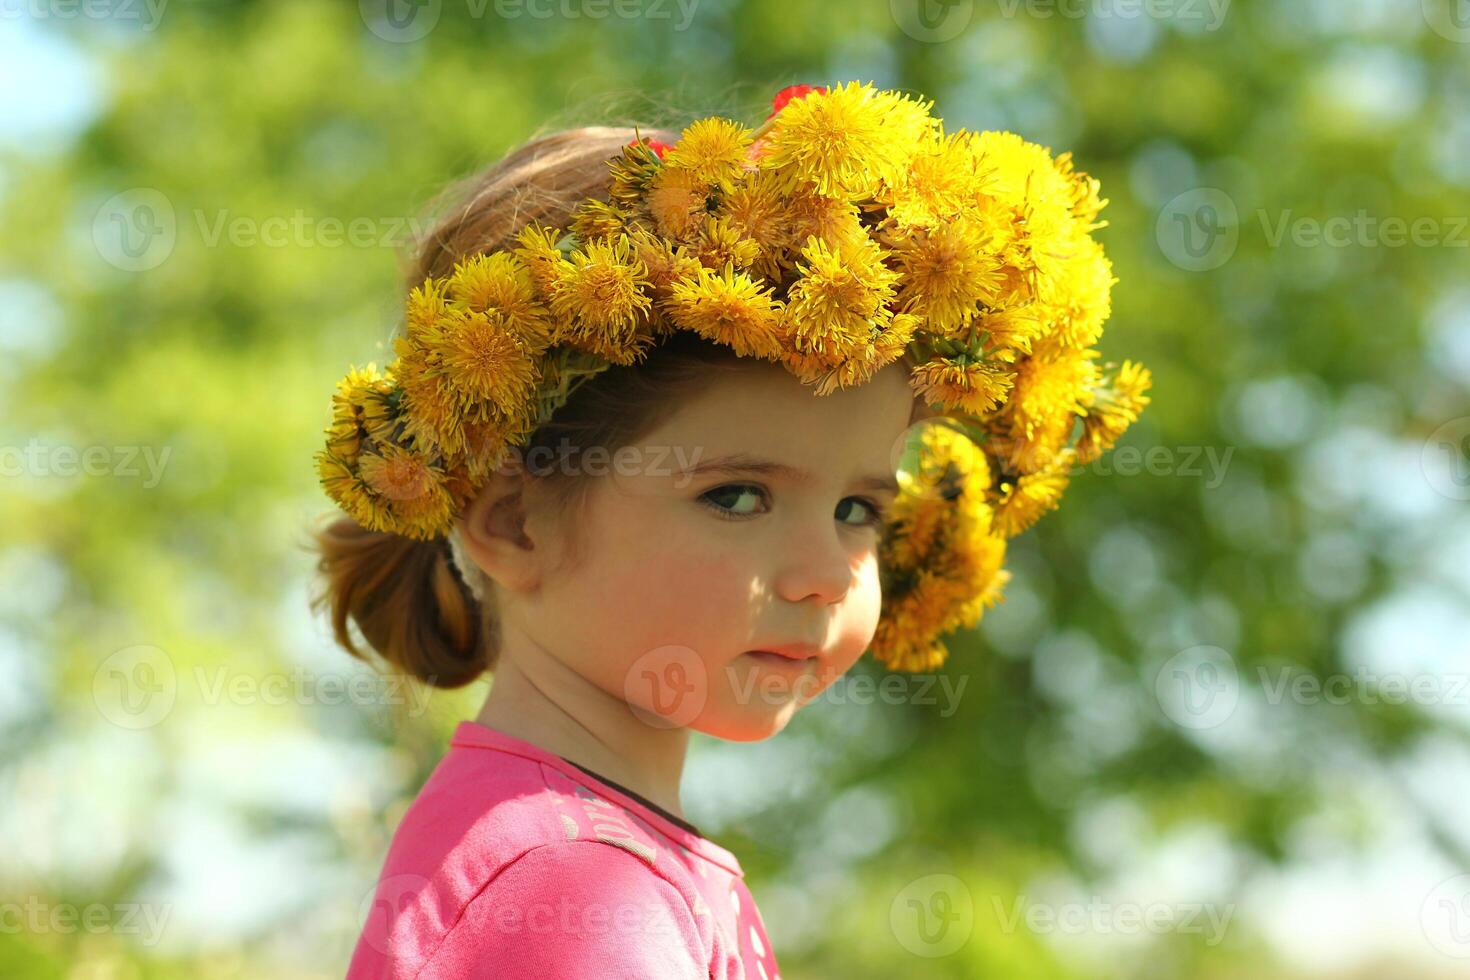 Springtime sunlit portrait of a cute two years old girl posing with a dandelion wreath, looking at the camera photo